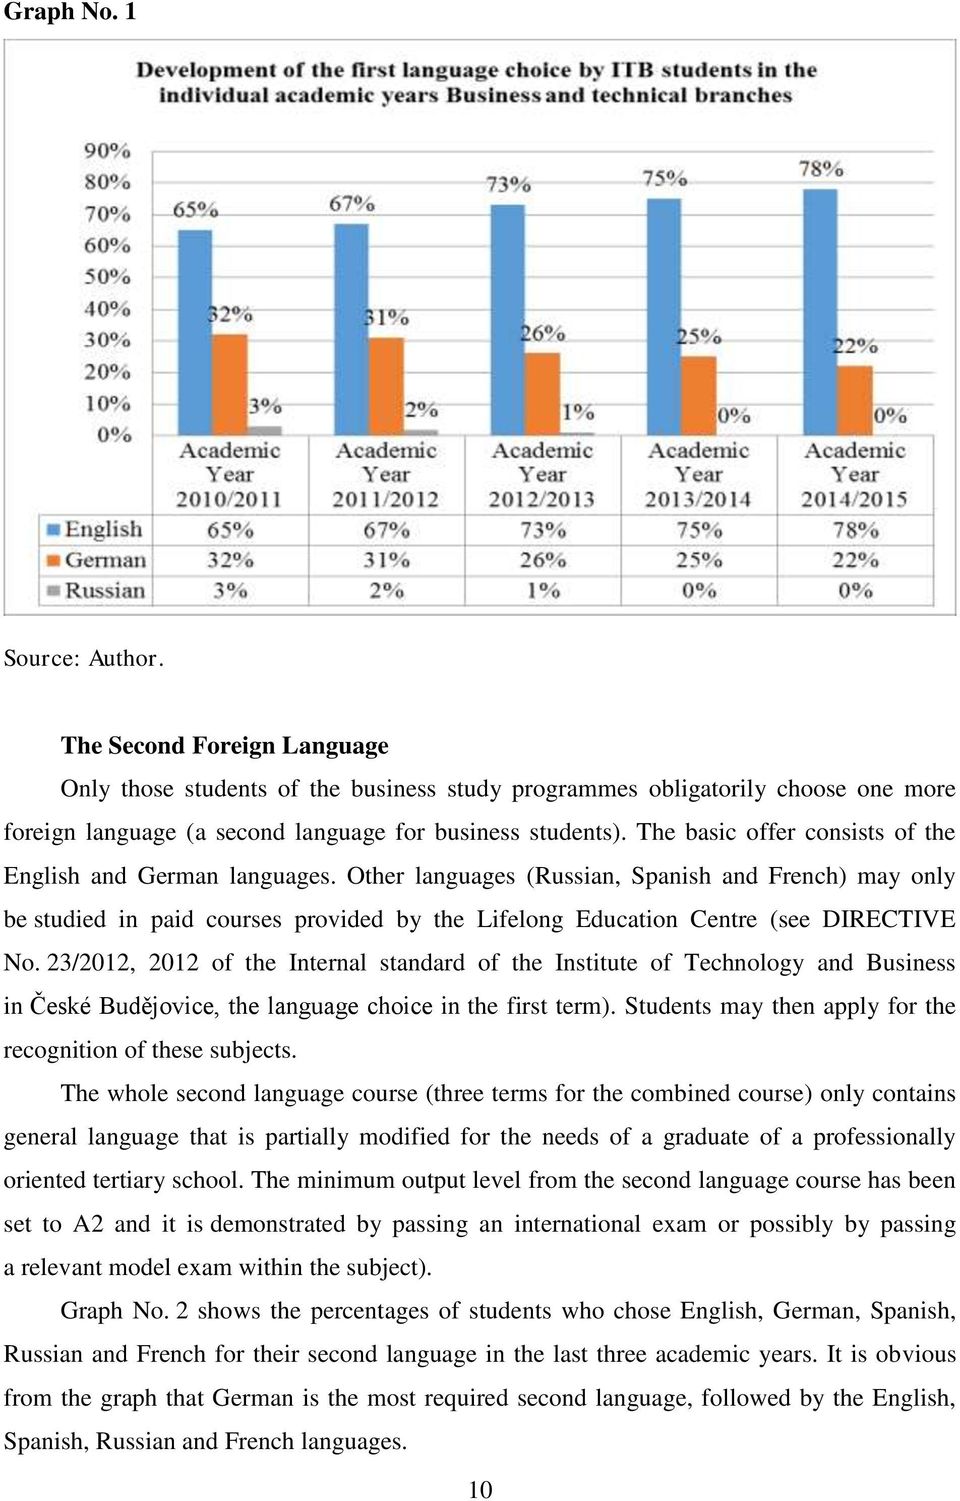 Other languages (Russian, Spanish and French) may only be studied in paid courses provided by the Lifelong Education Centre (see DIRECTIVE No.